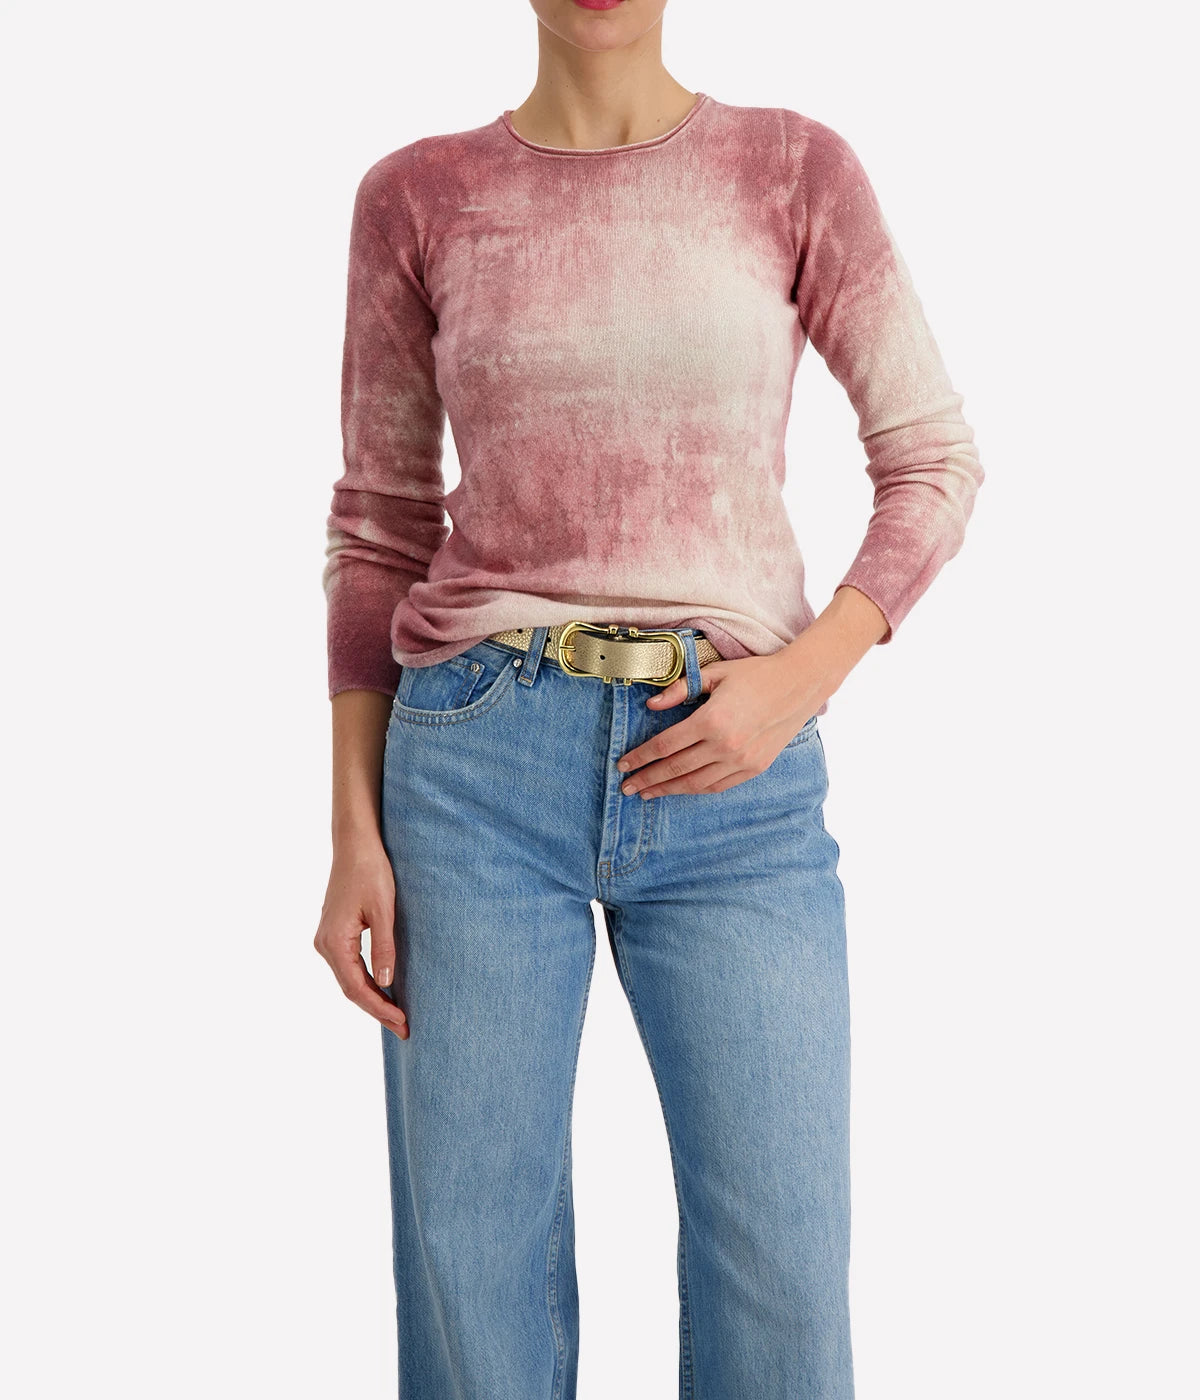 100% cashmere slim cut white and dusty pink longsleeve knit jumper by Avant Toi.